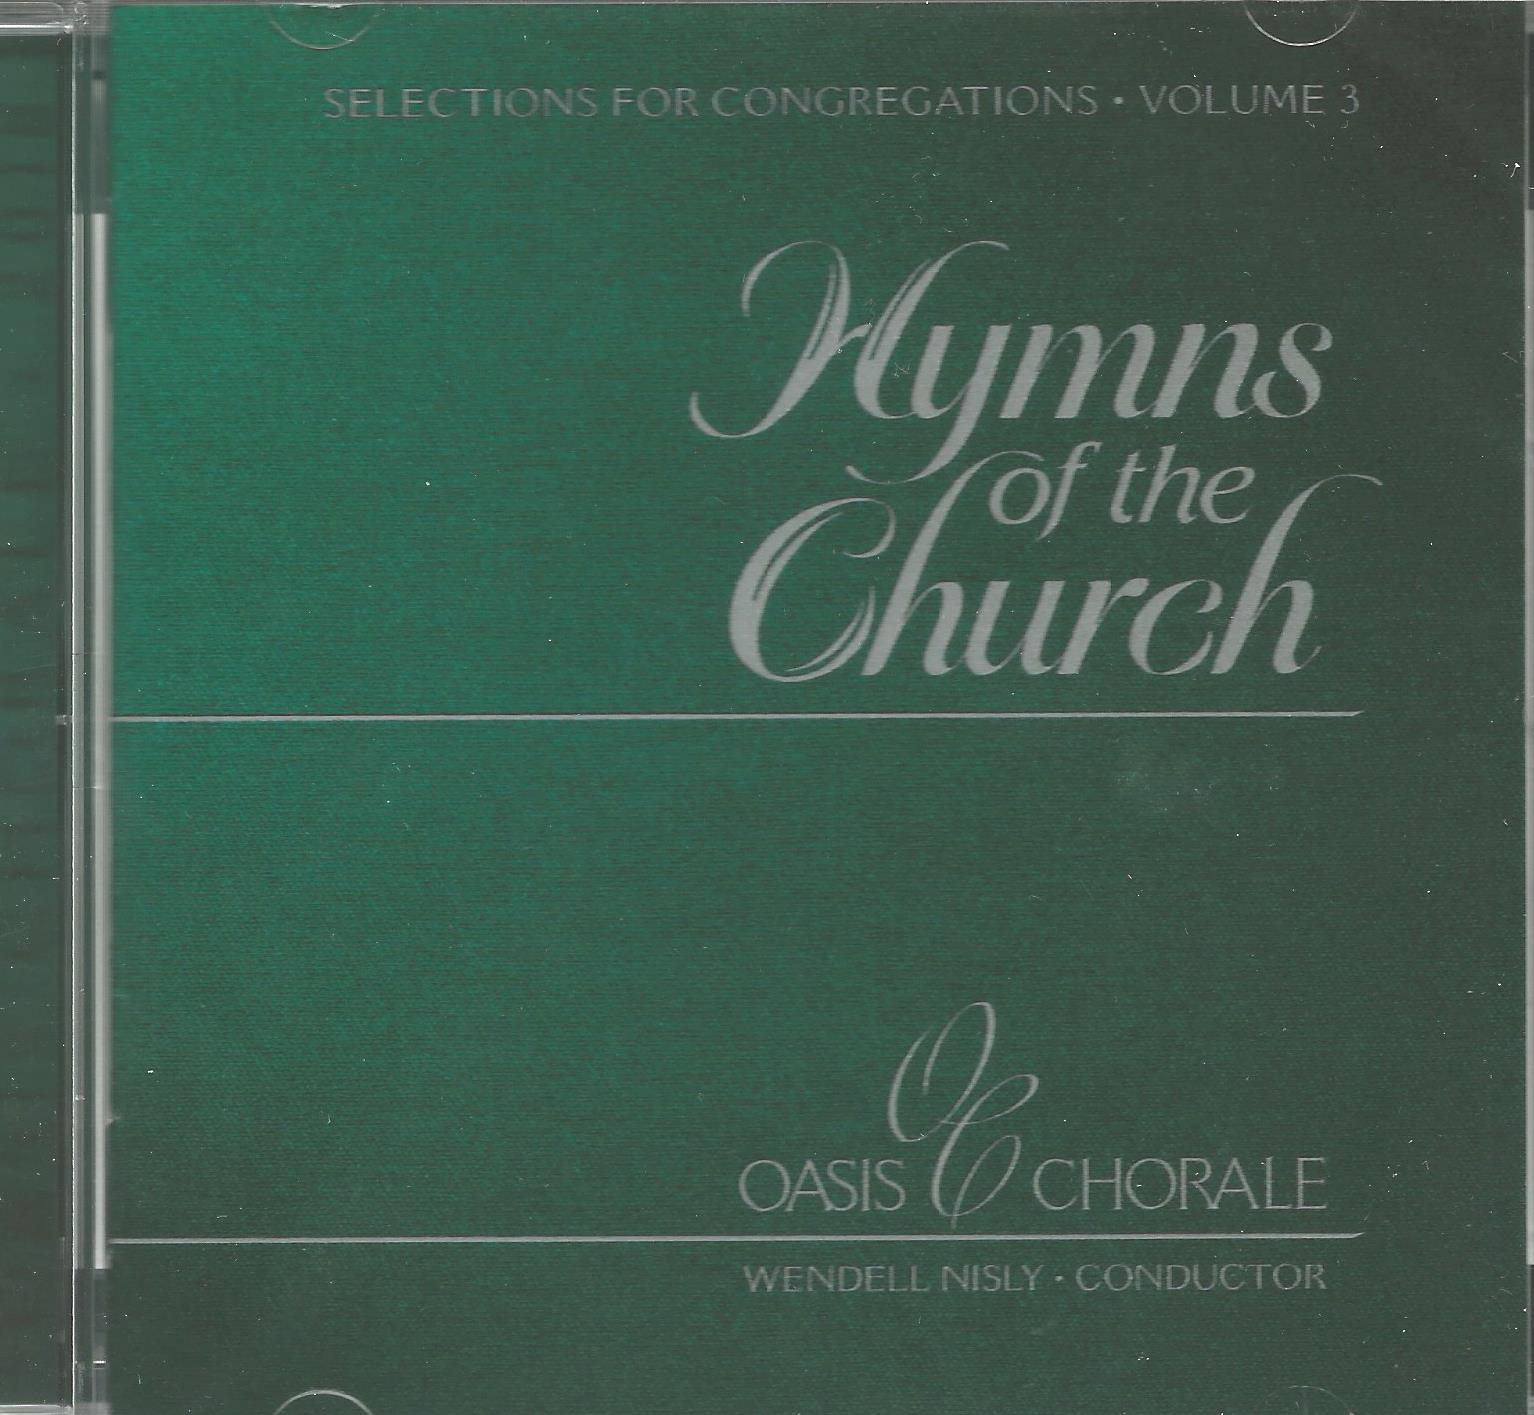 HYMNS OF THE CHURCH, VOLUME 3 Oasis Chorale